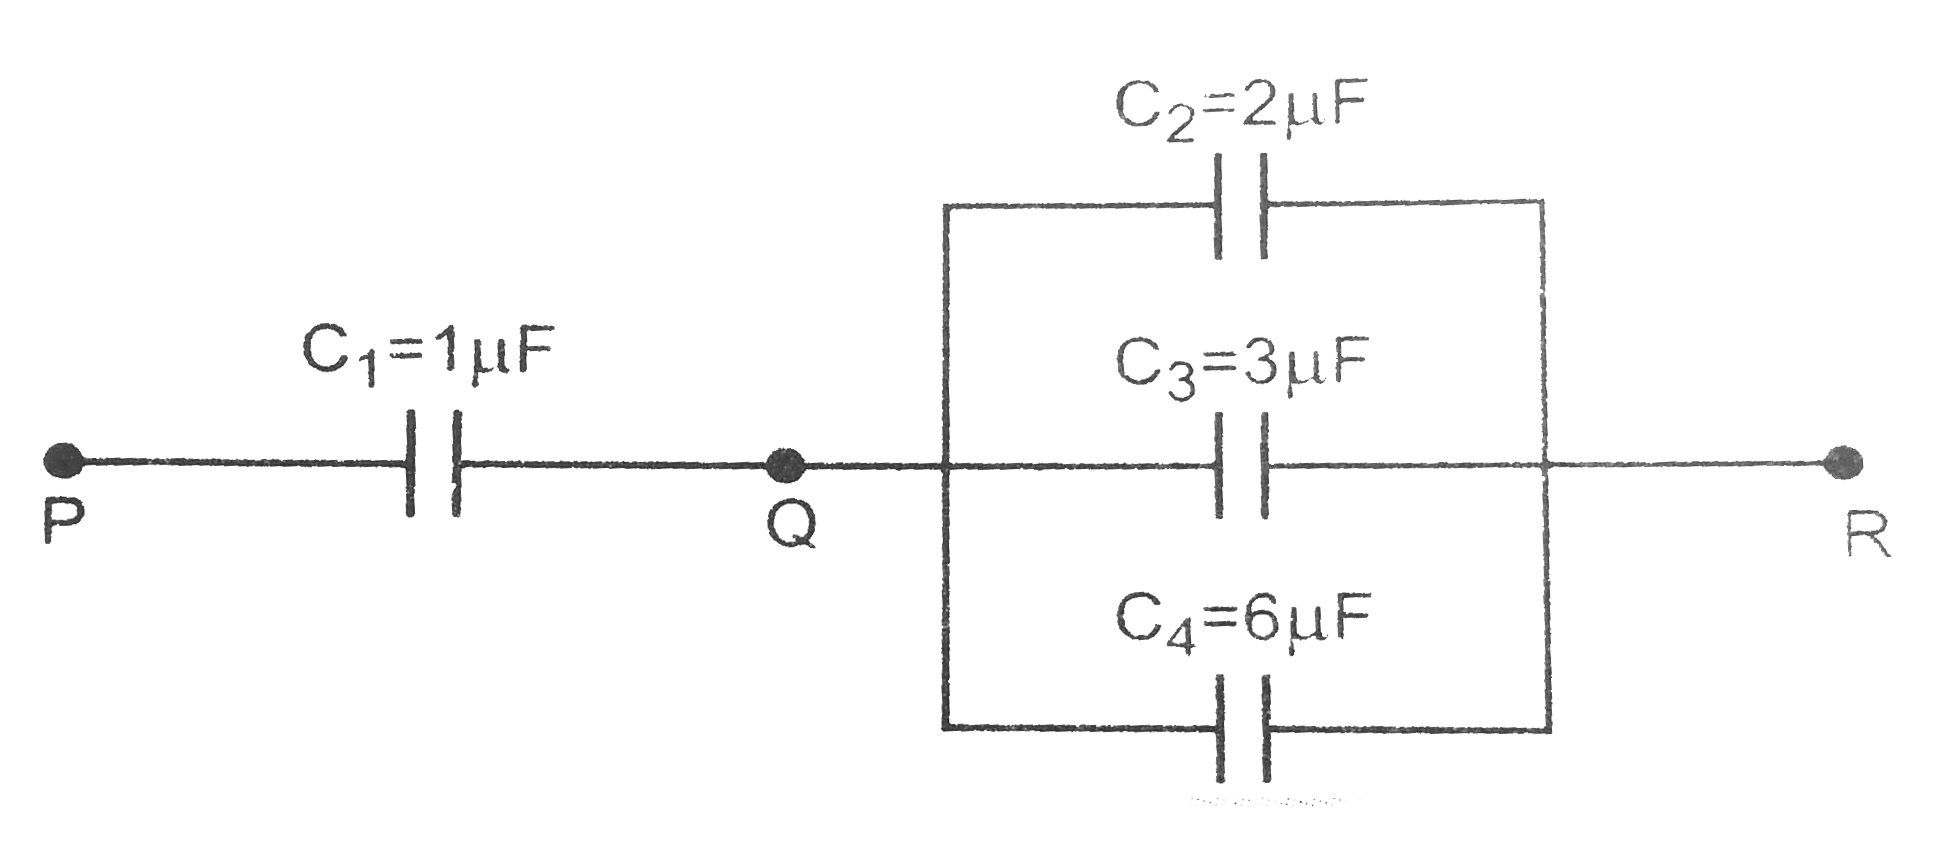 In Fig, the energy stored in C(4) is 27 J. Calculate the total energy in the system.